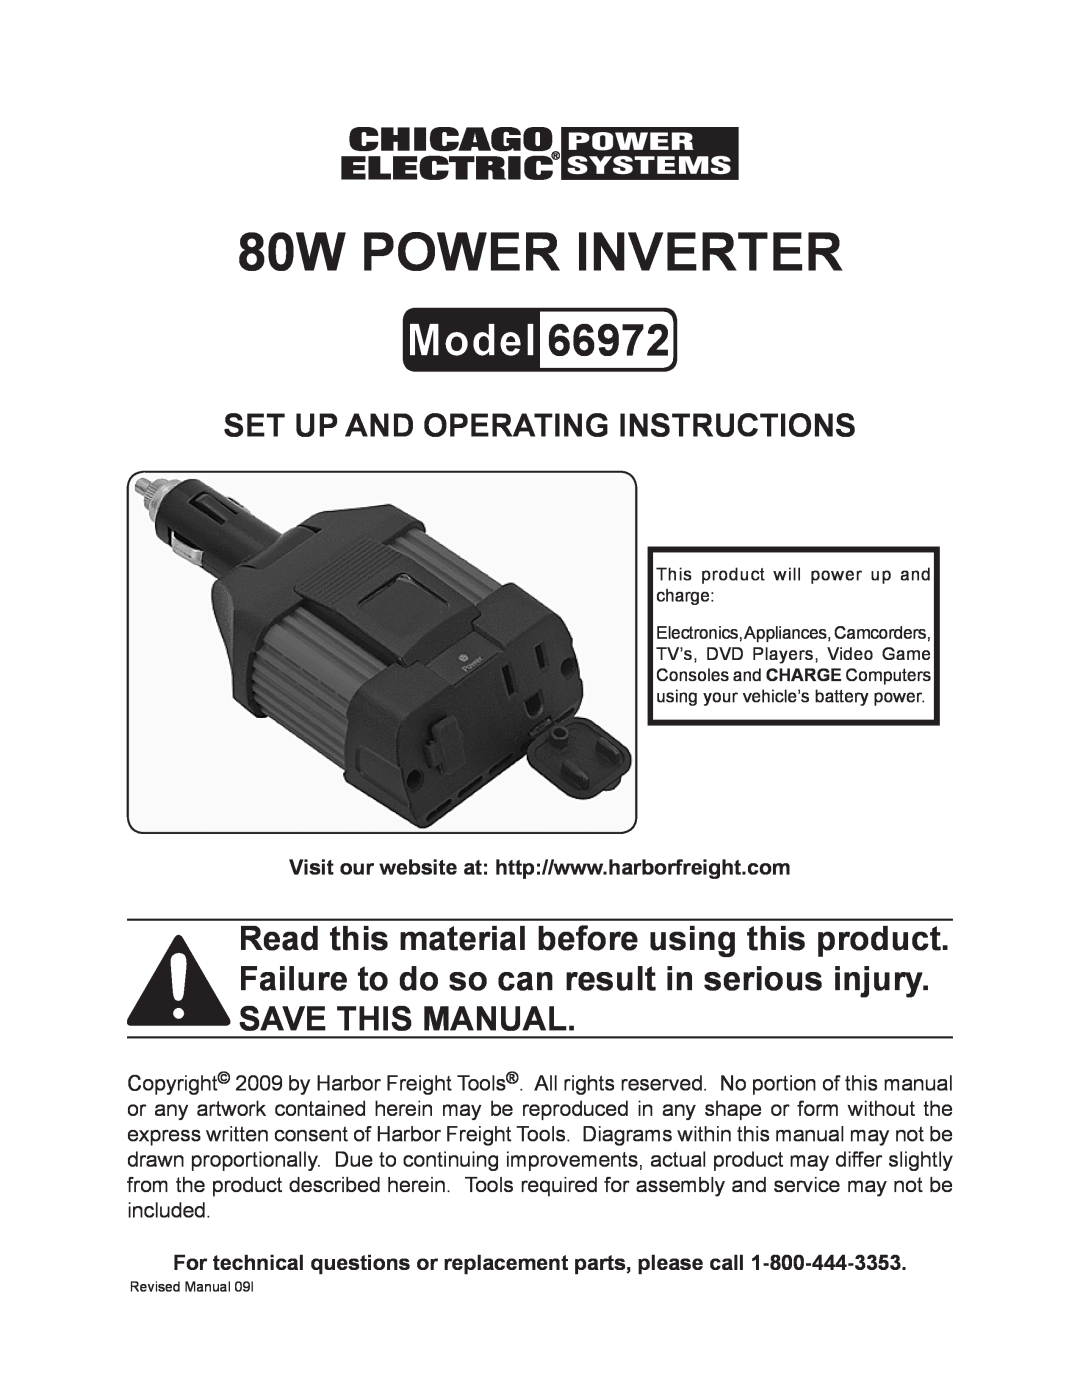 Chicago Electric 66972 operating instructions 80w pOWER iNVERTER, Set up and Operating Instructions 